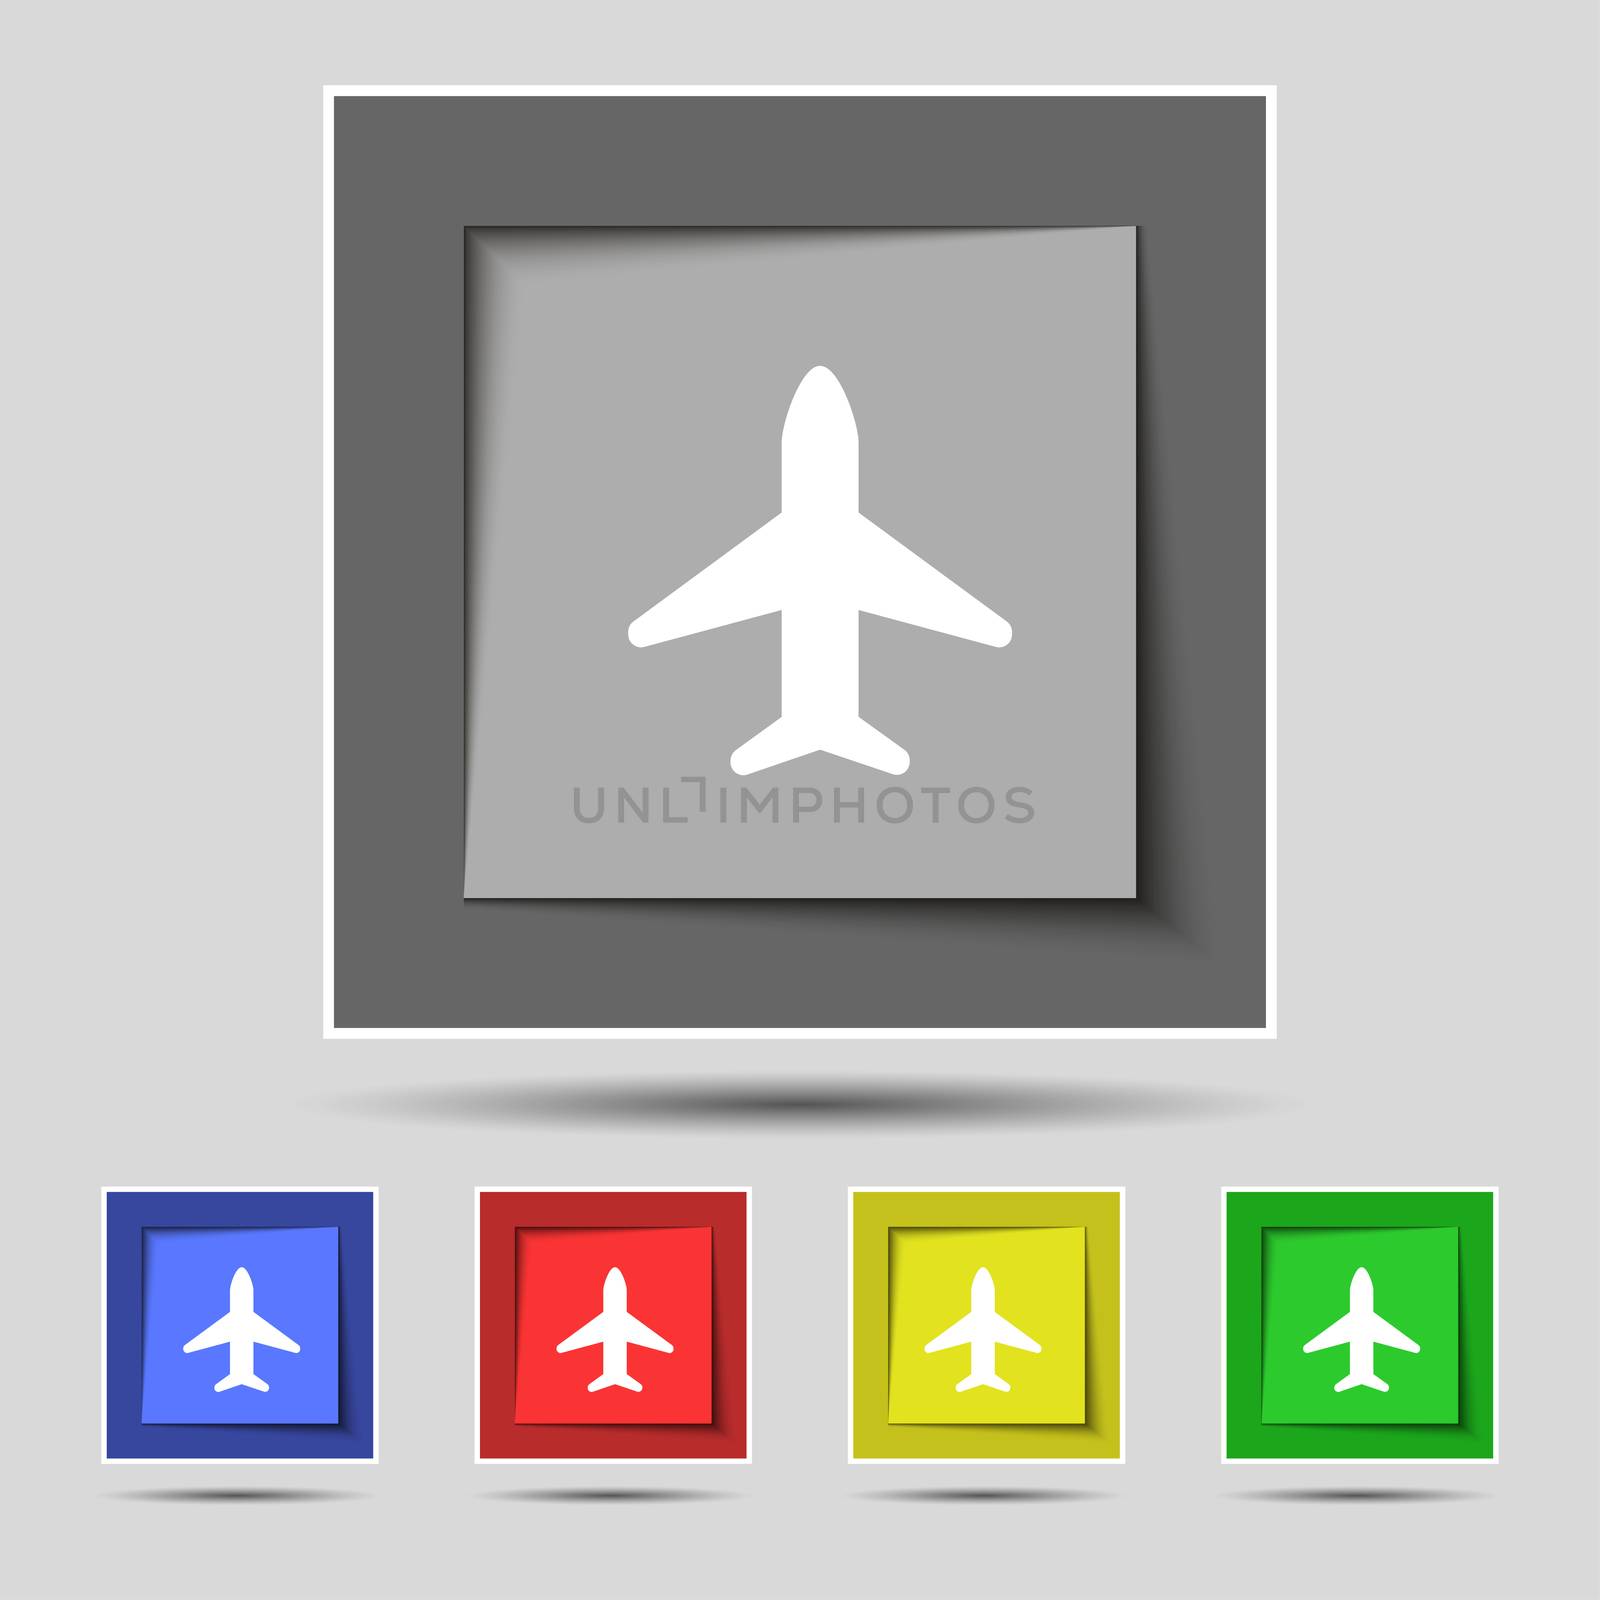 Airplane, Plane, Travel, Flight icon sign on the original five colored buttons.  by serhii_lohvyniuk